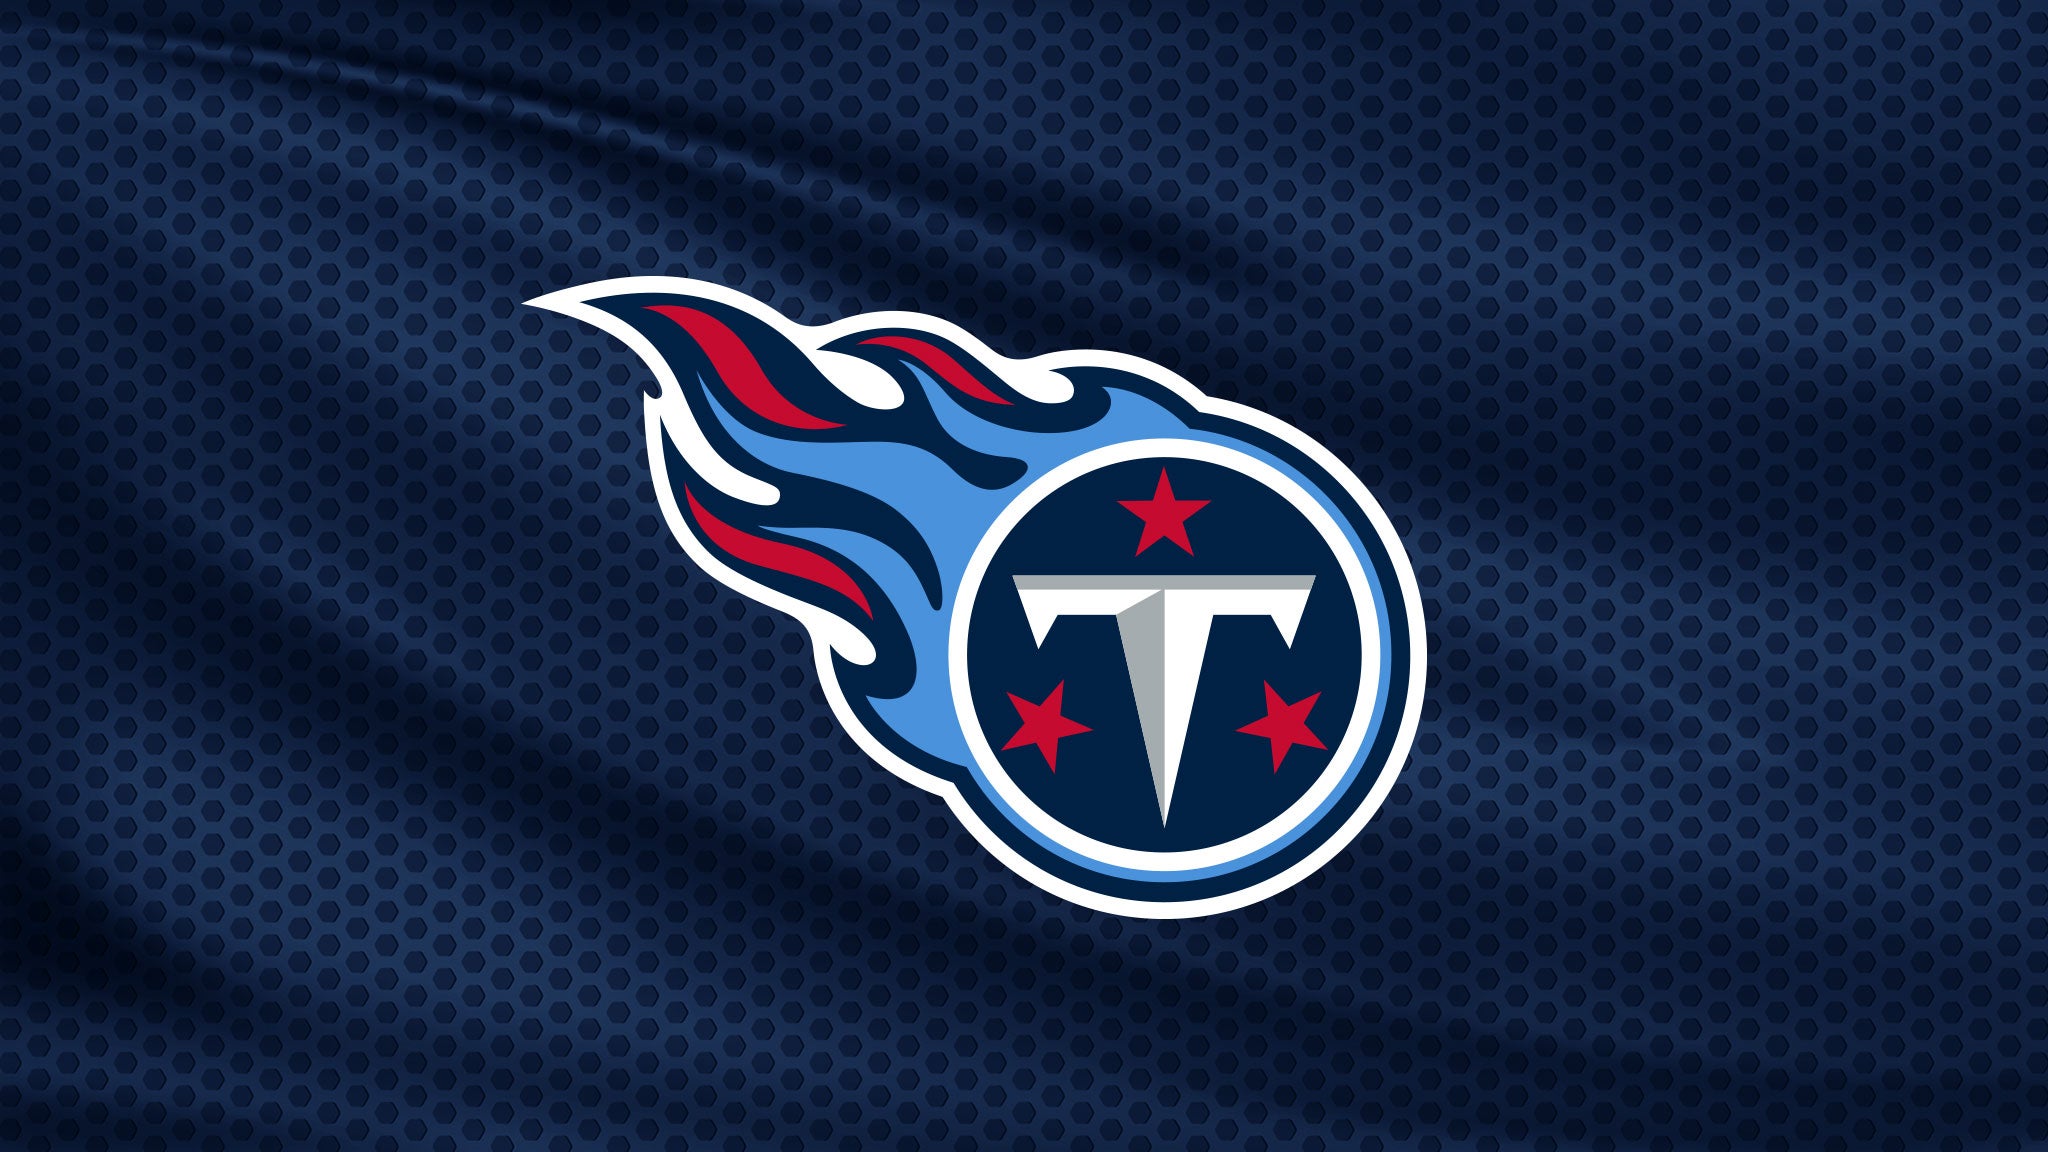 Tennessee Titans vs. Indianapolis Colts hero